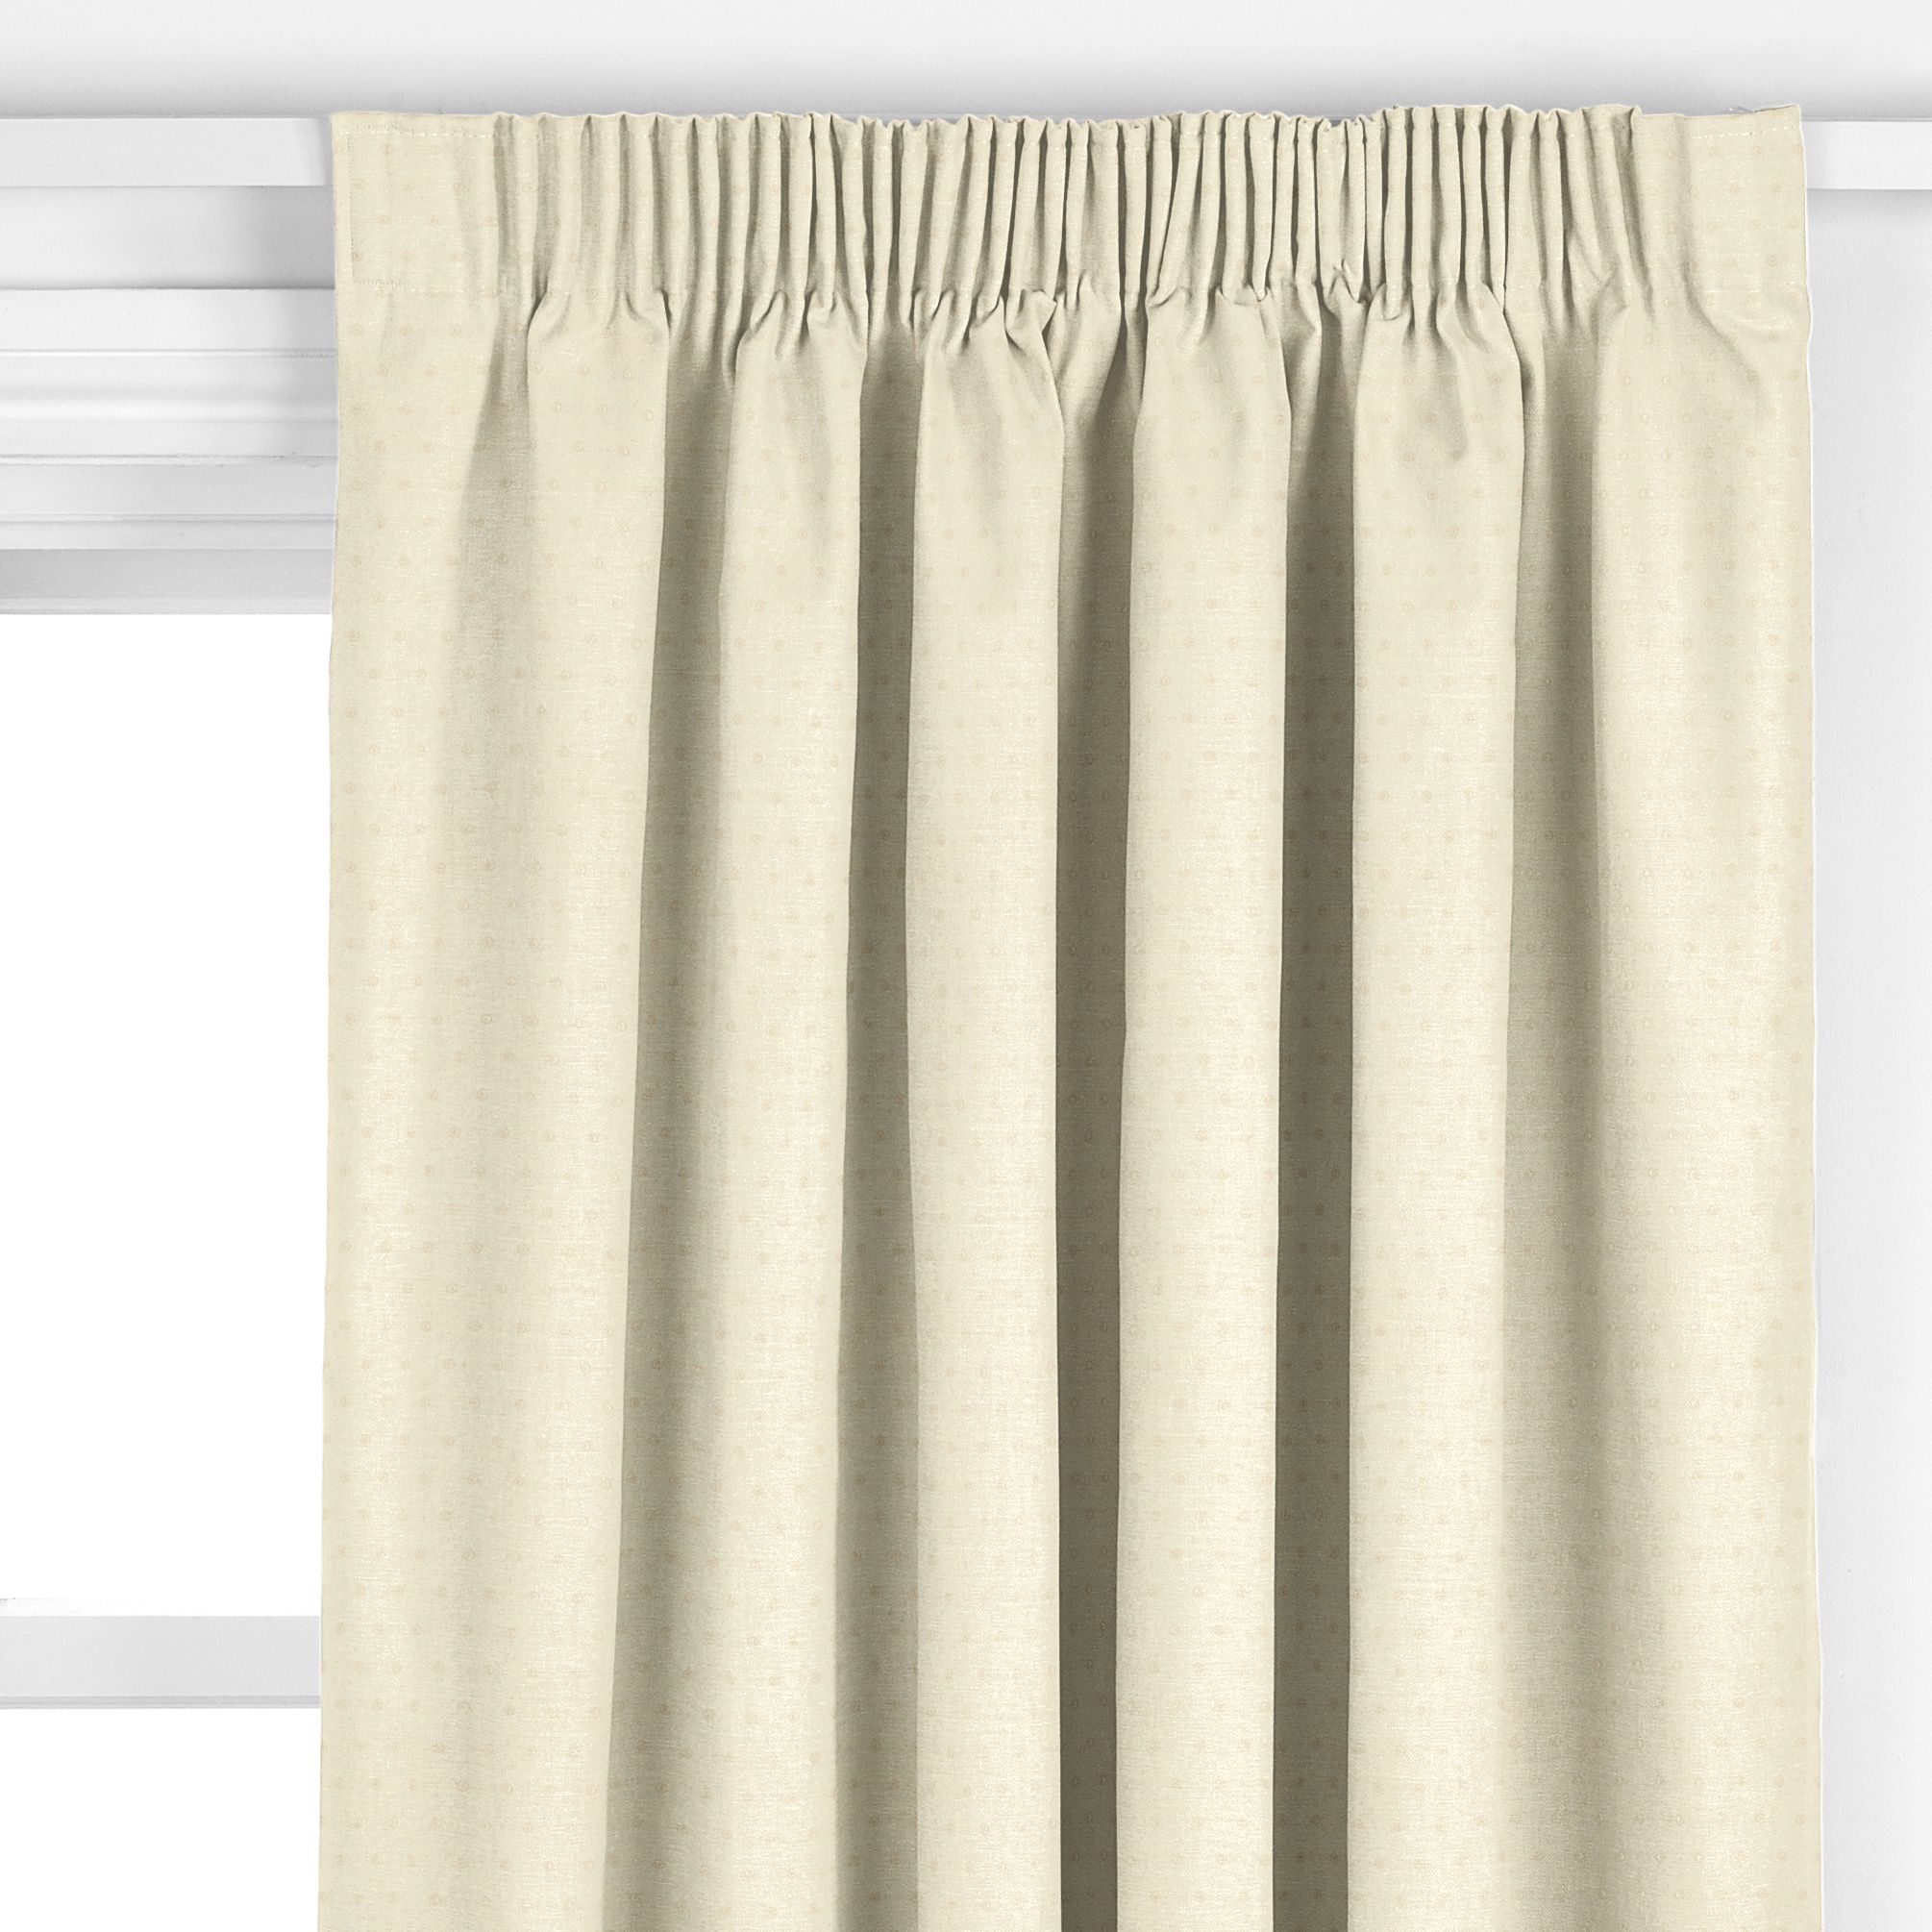 Chequers Pencil Pleat Curtains, Oyster